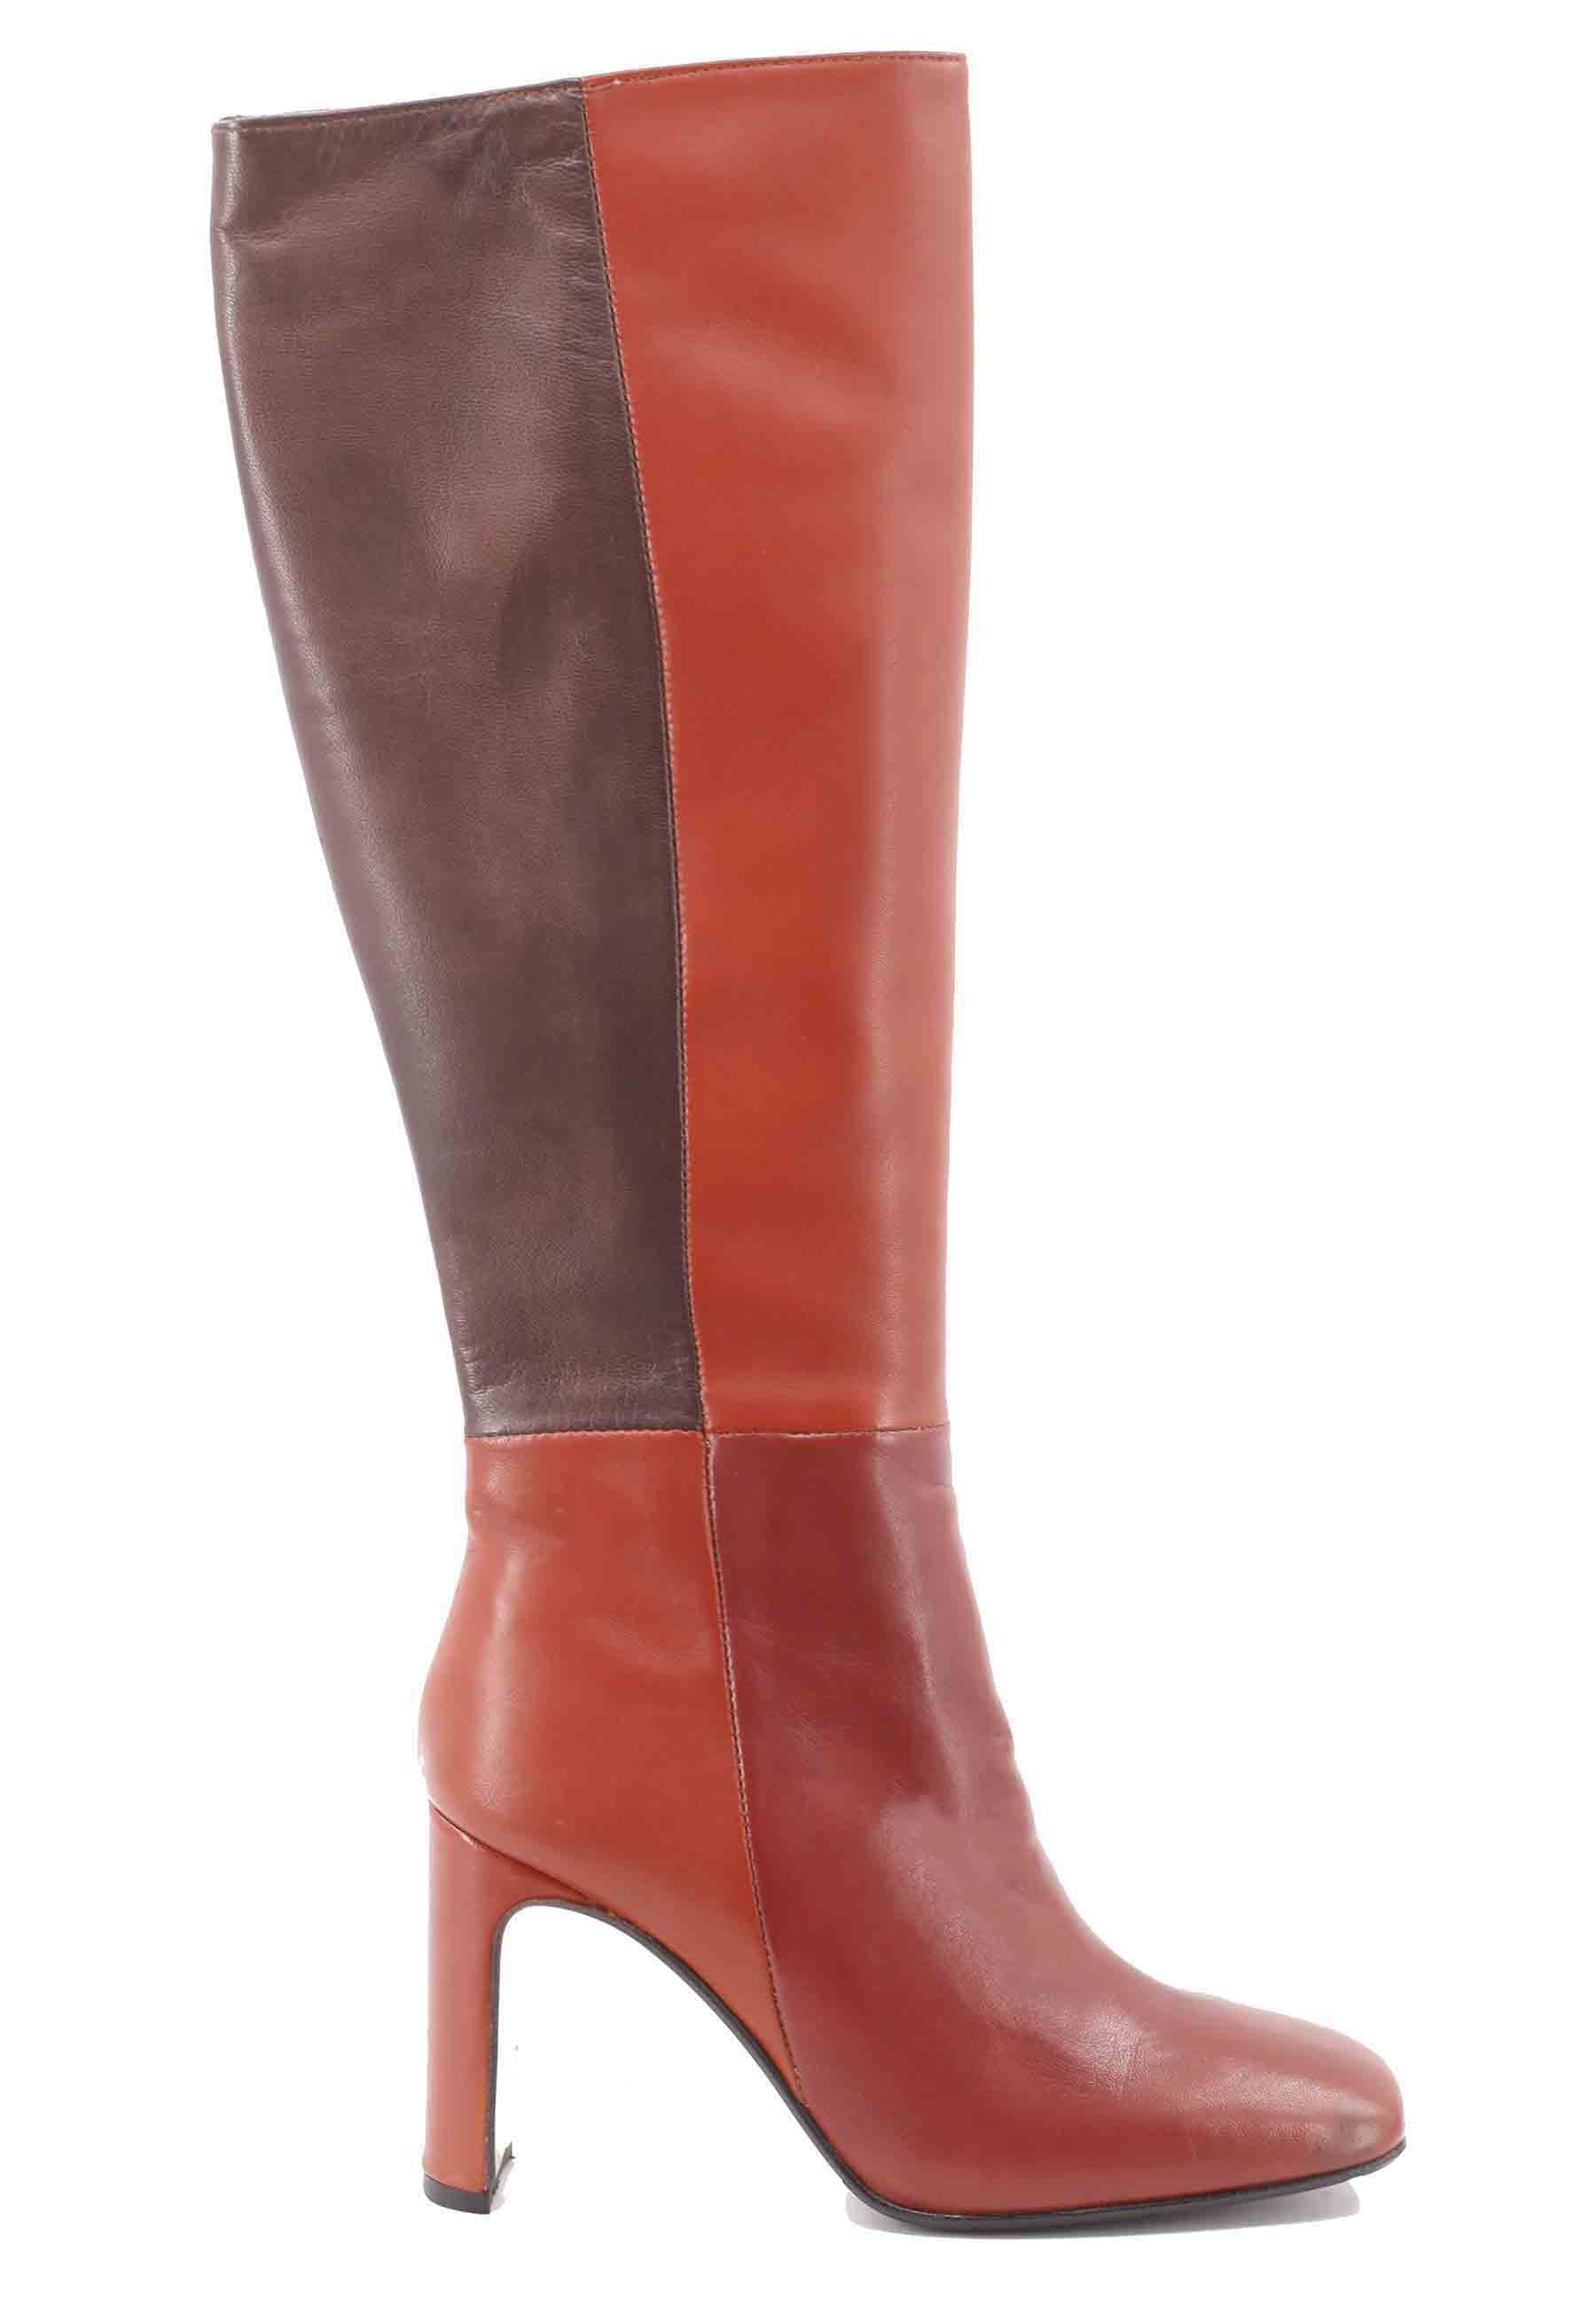 ST1300 patchwork boots in tan and brown leather with high heel